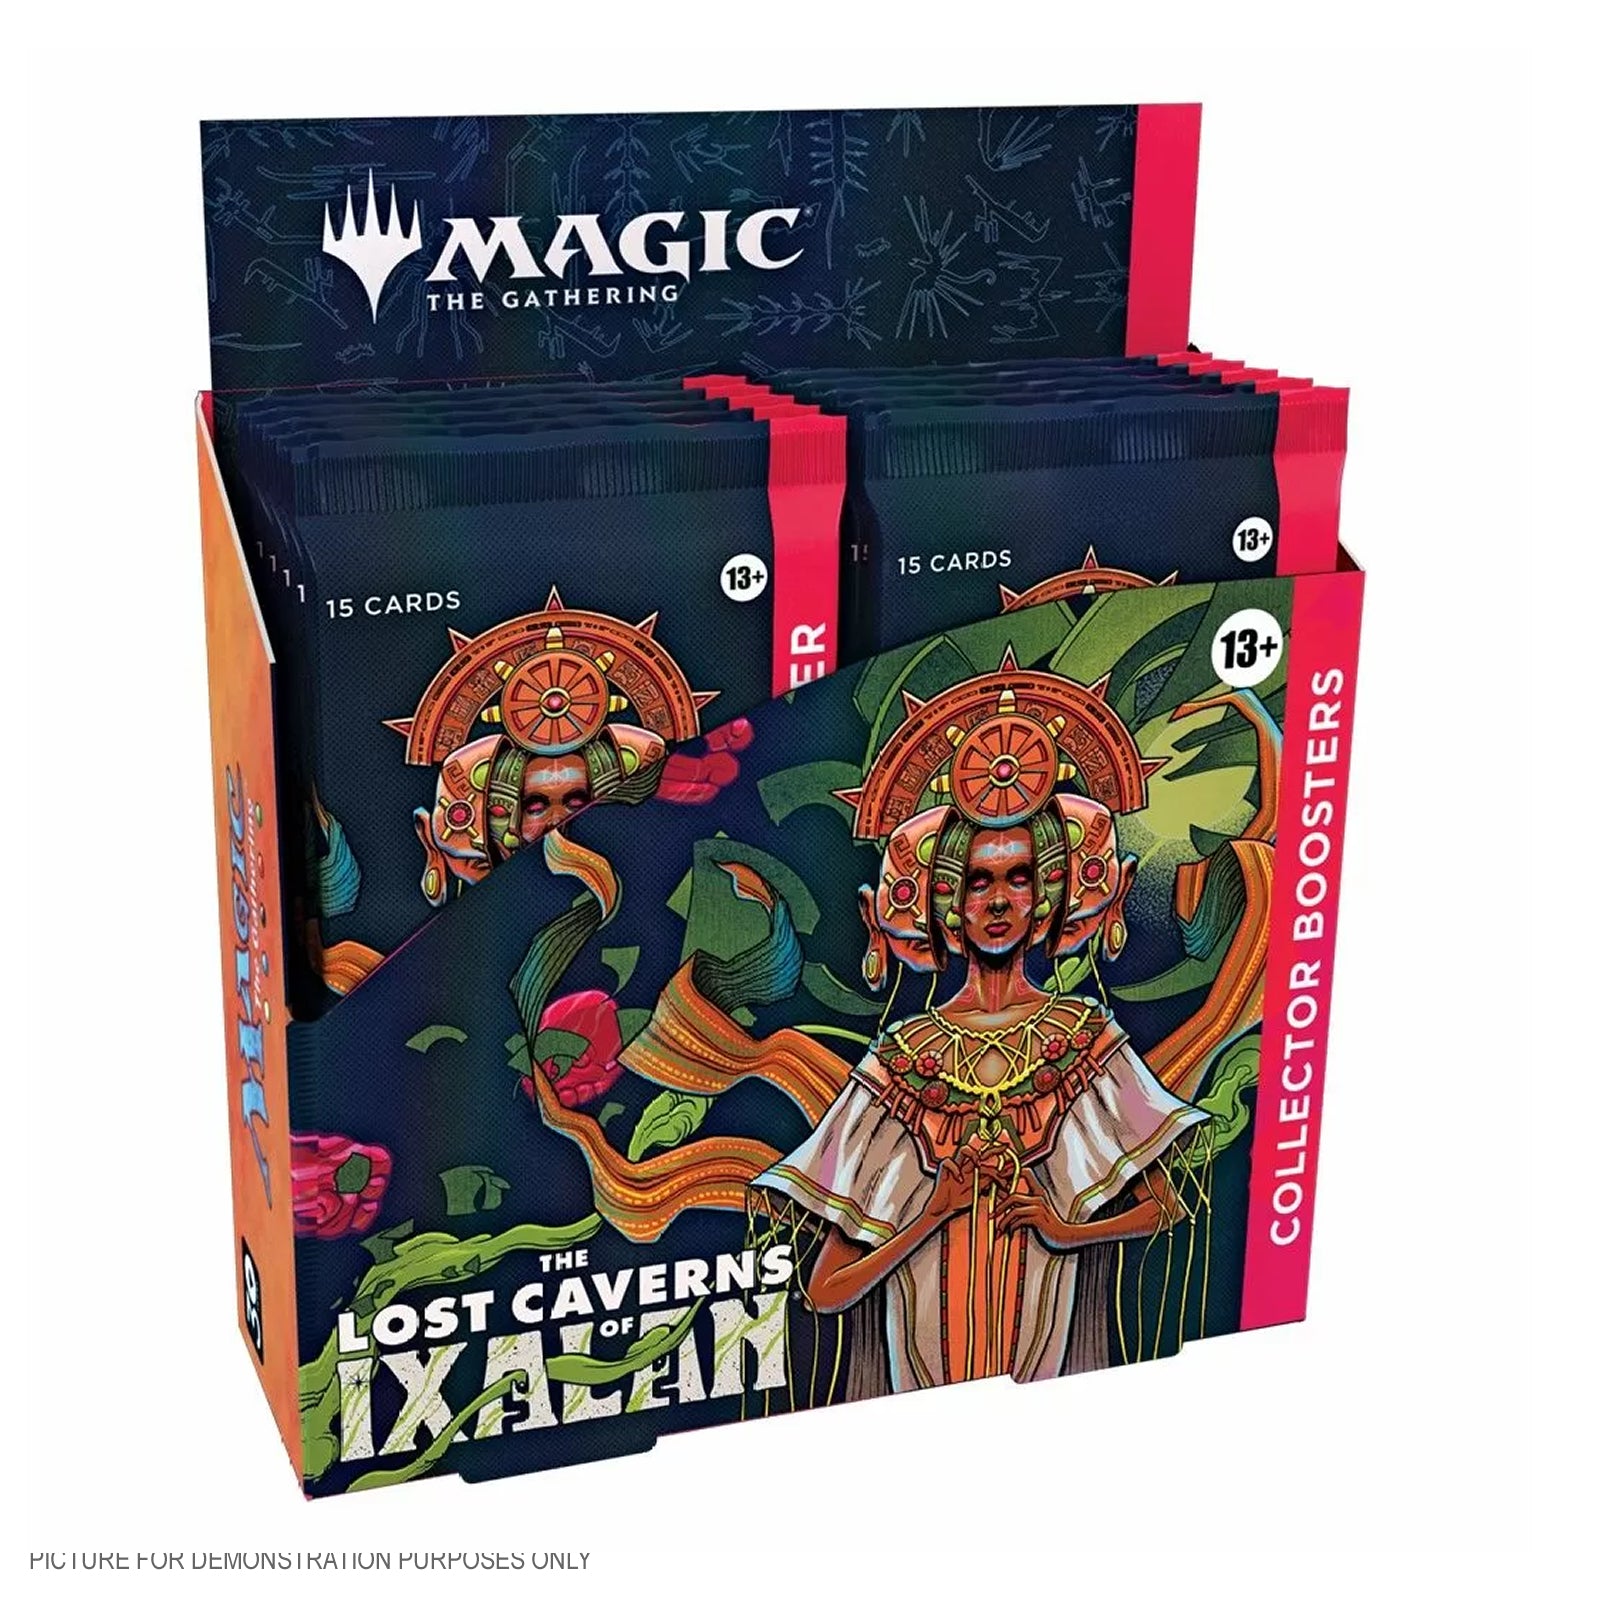 Magic The Gathering - The Lost Caverns of Ixalan Collector Booster Box